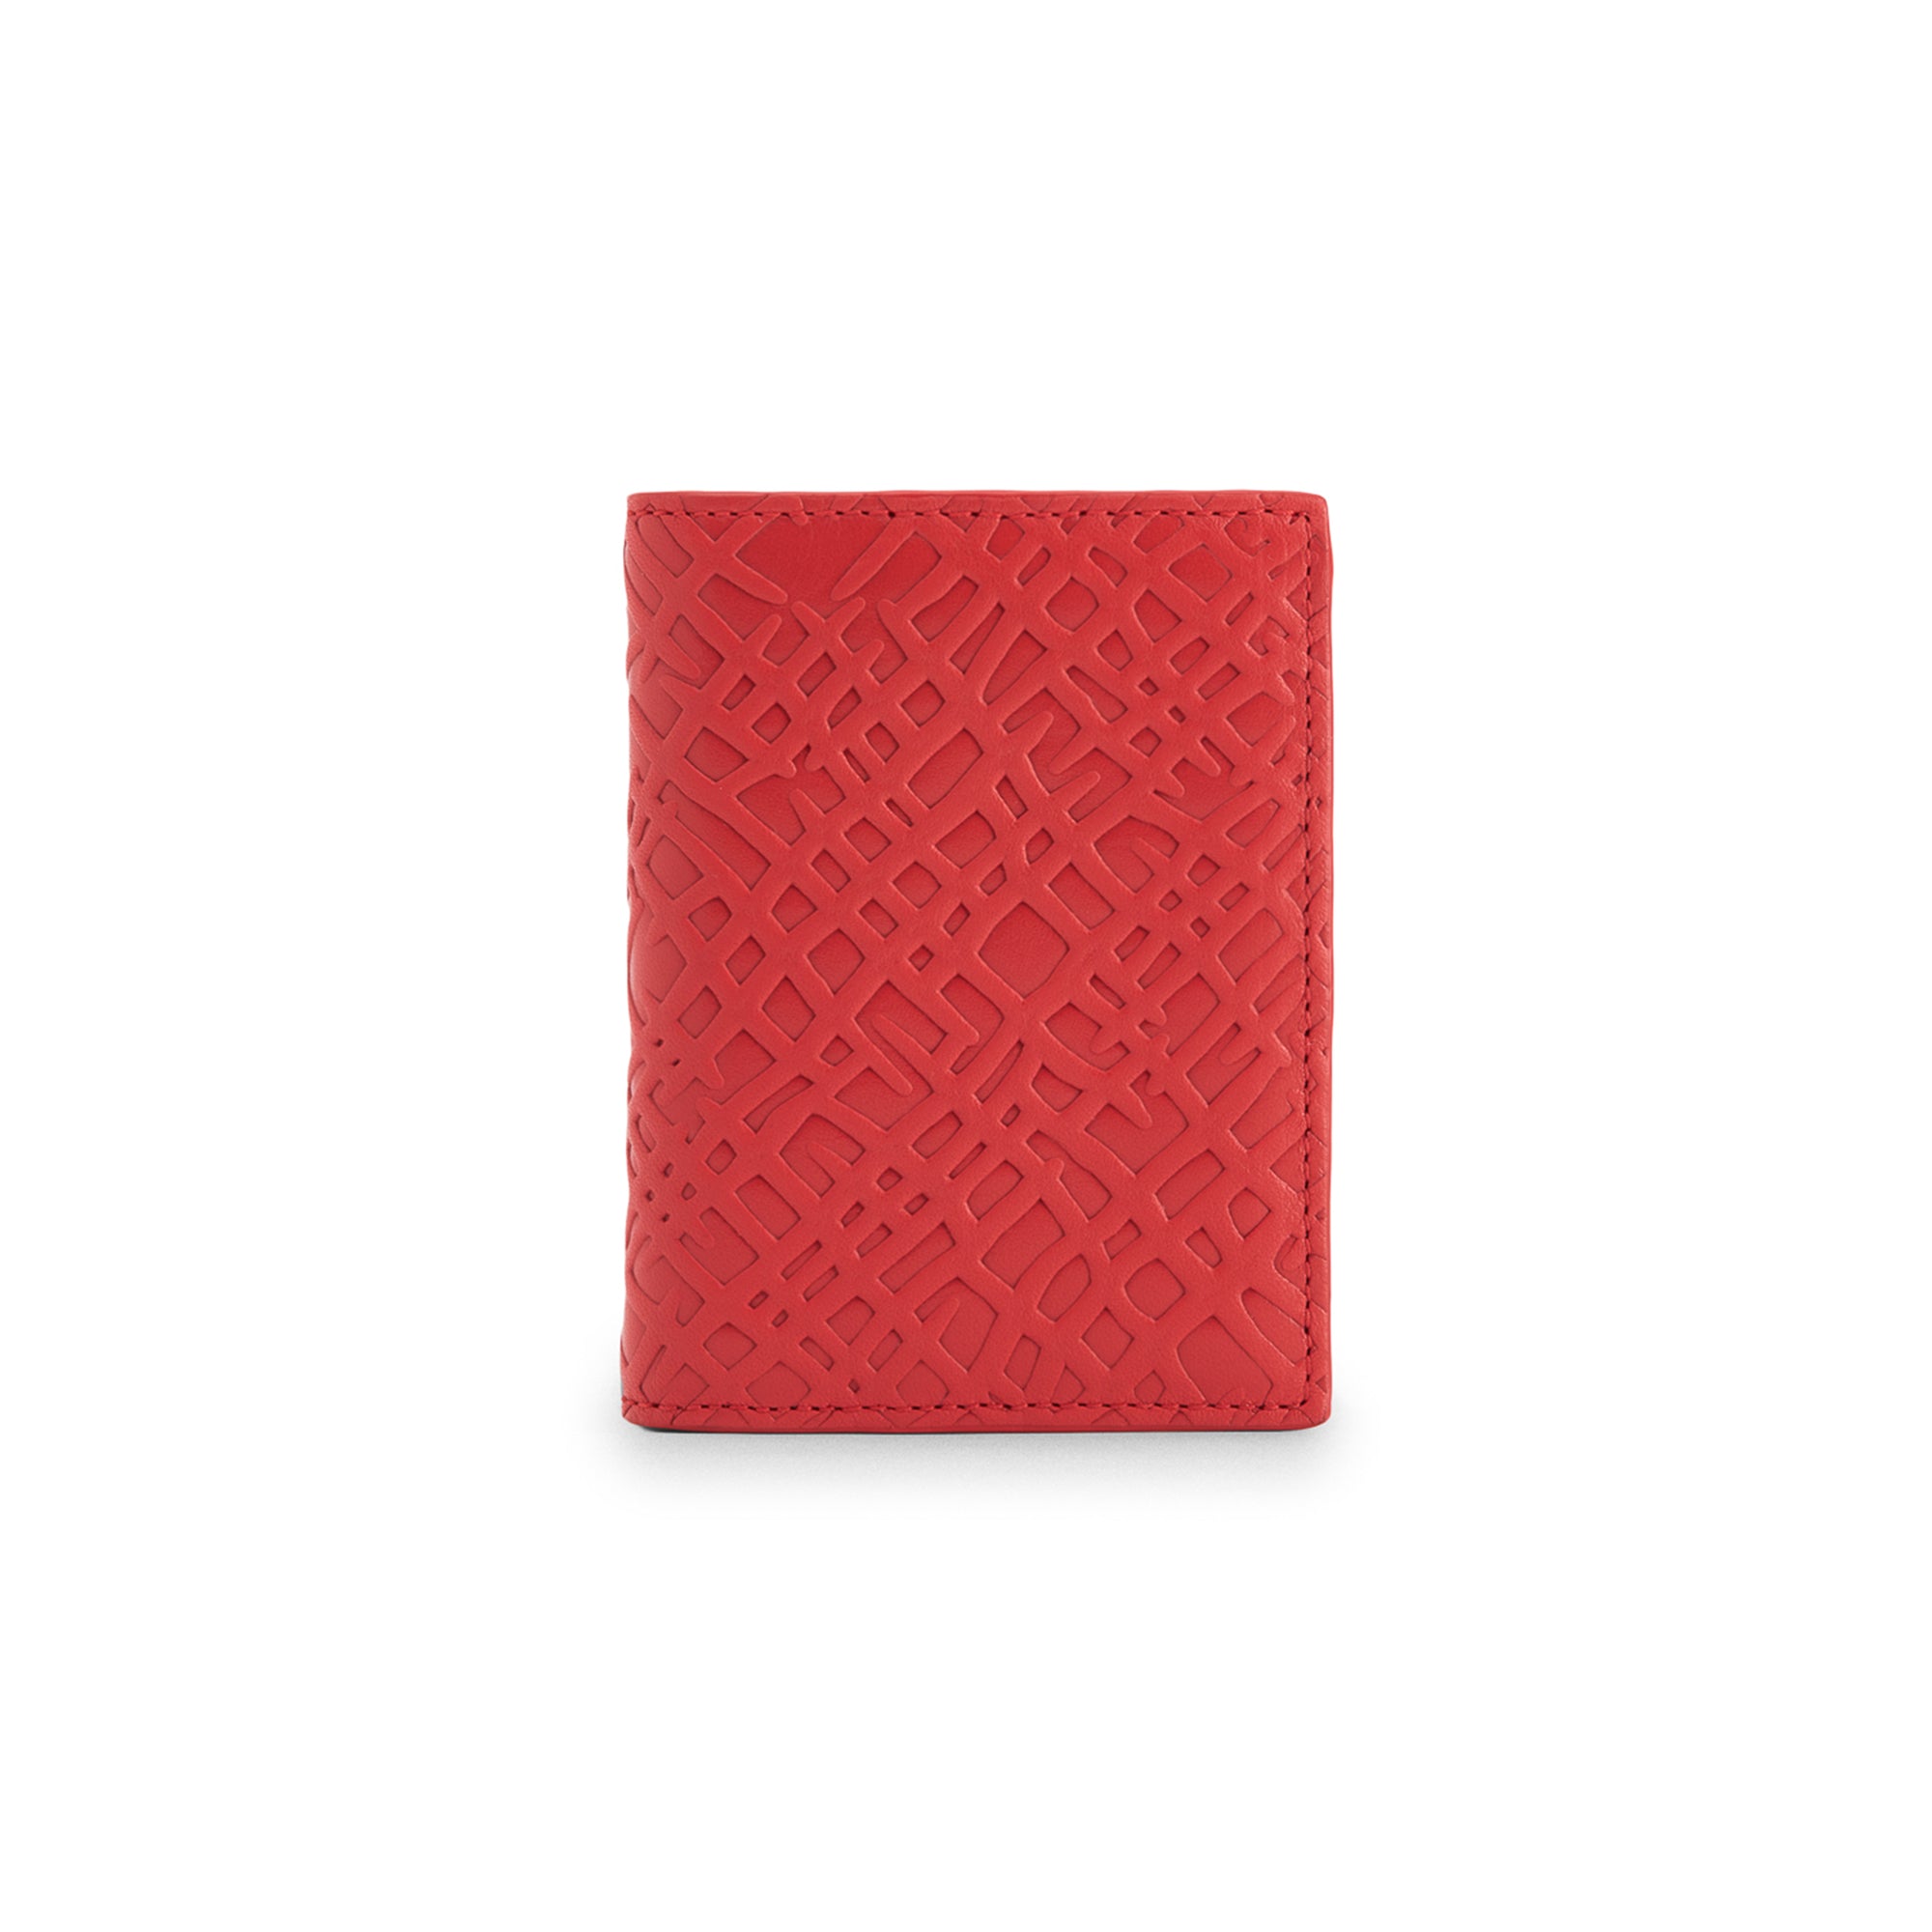 CDG Wallet - Embossed Roots Bifold Wallet - (Red SA0641ER) view 1